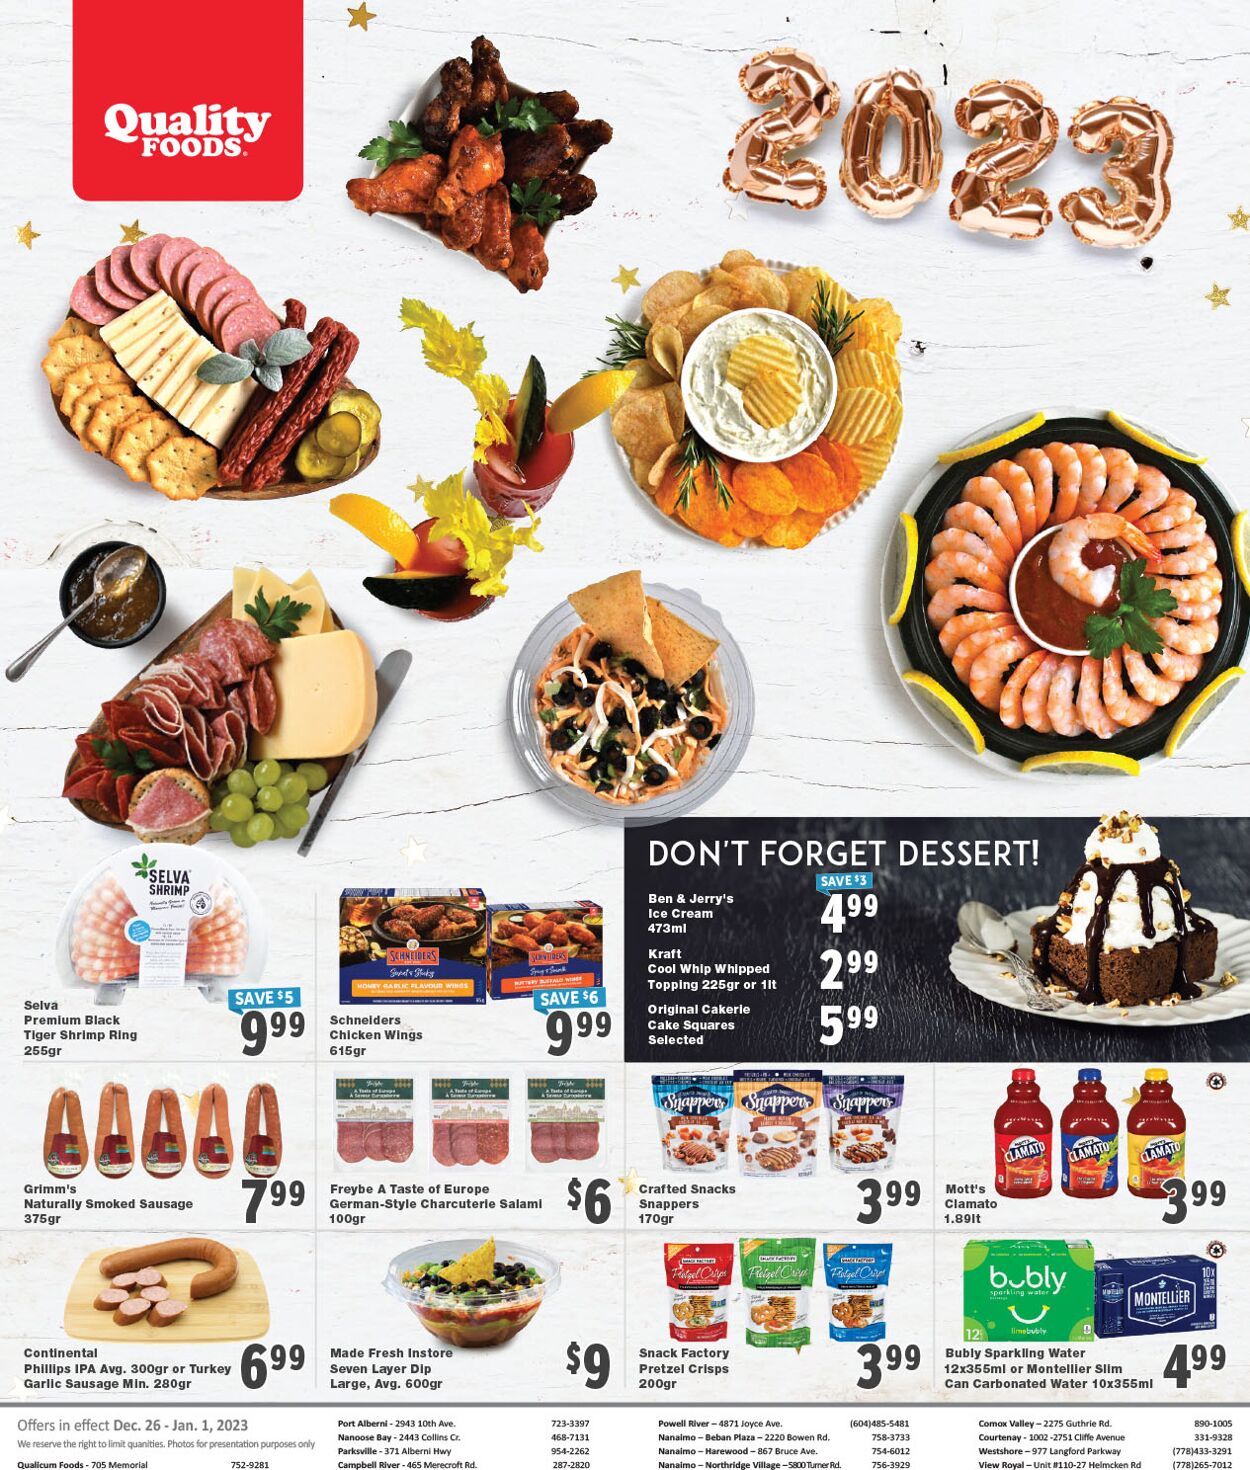 Flyer Quality Foods 26.12.2022 - 01.01.2023